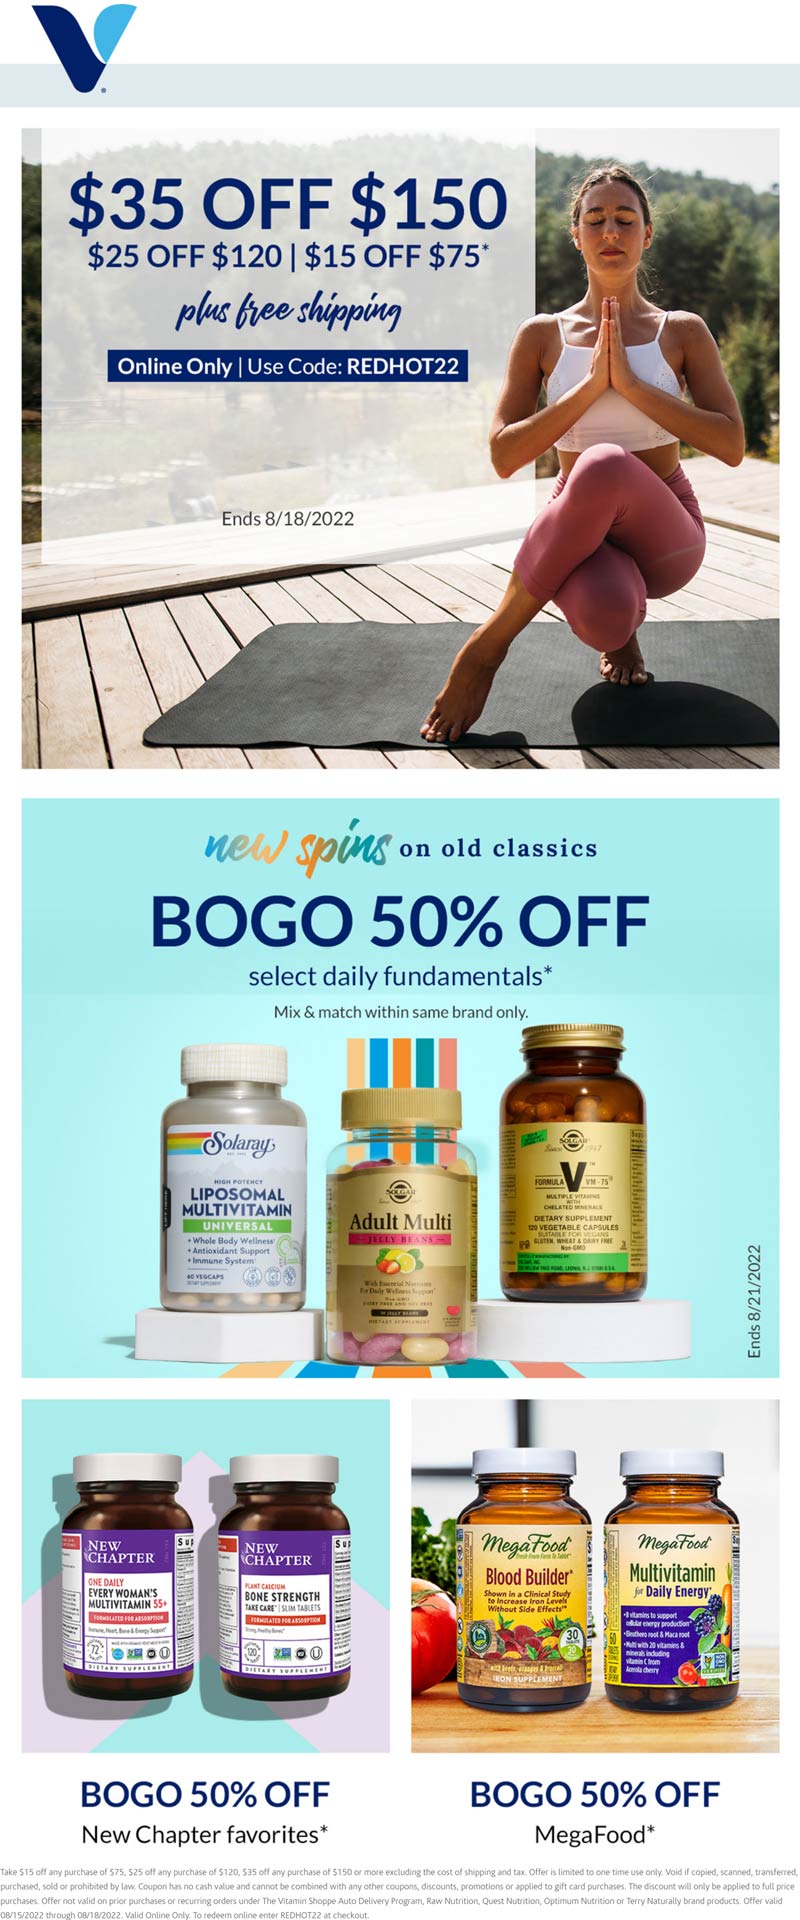 The Vitamin Shoppe stores Coupon  $15-$35 off $75+ online at The Vitamin Shoppe via promo code REDHOT22 #thevitaminshoppe 